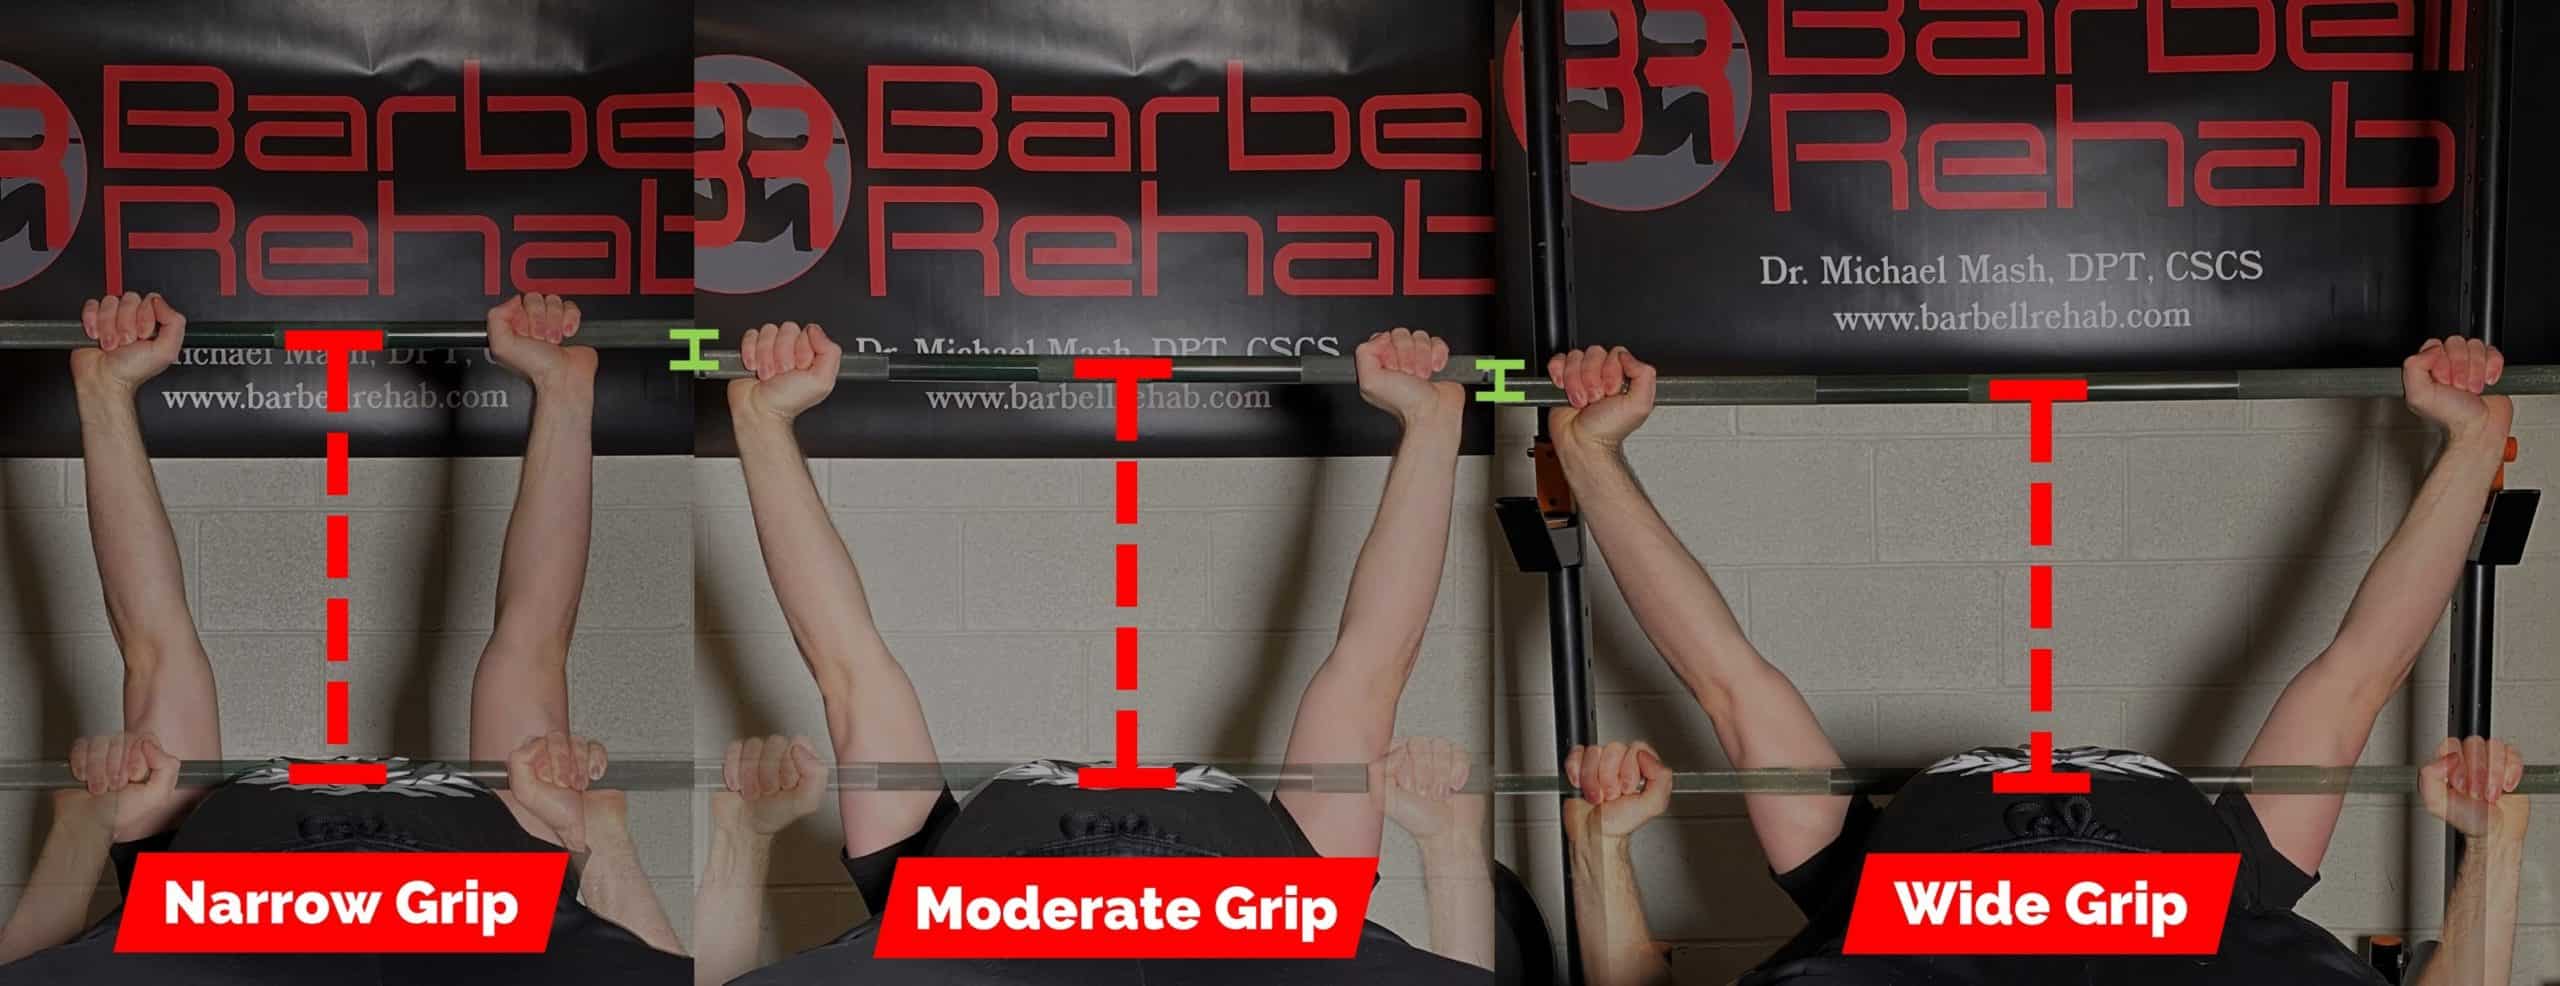 Raising the Bar: Analyzing Grip Widths and Bench Press Performance